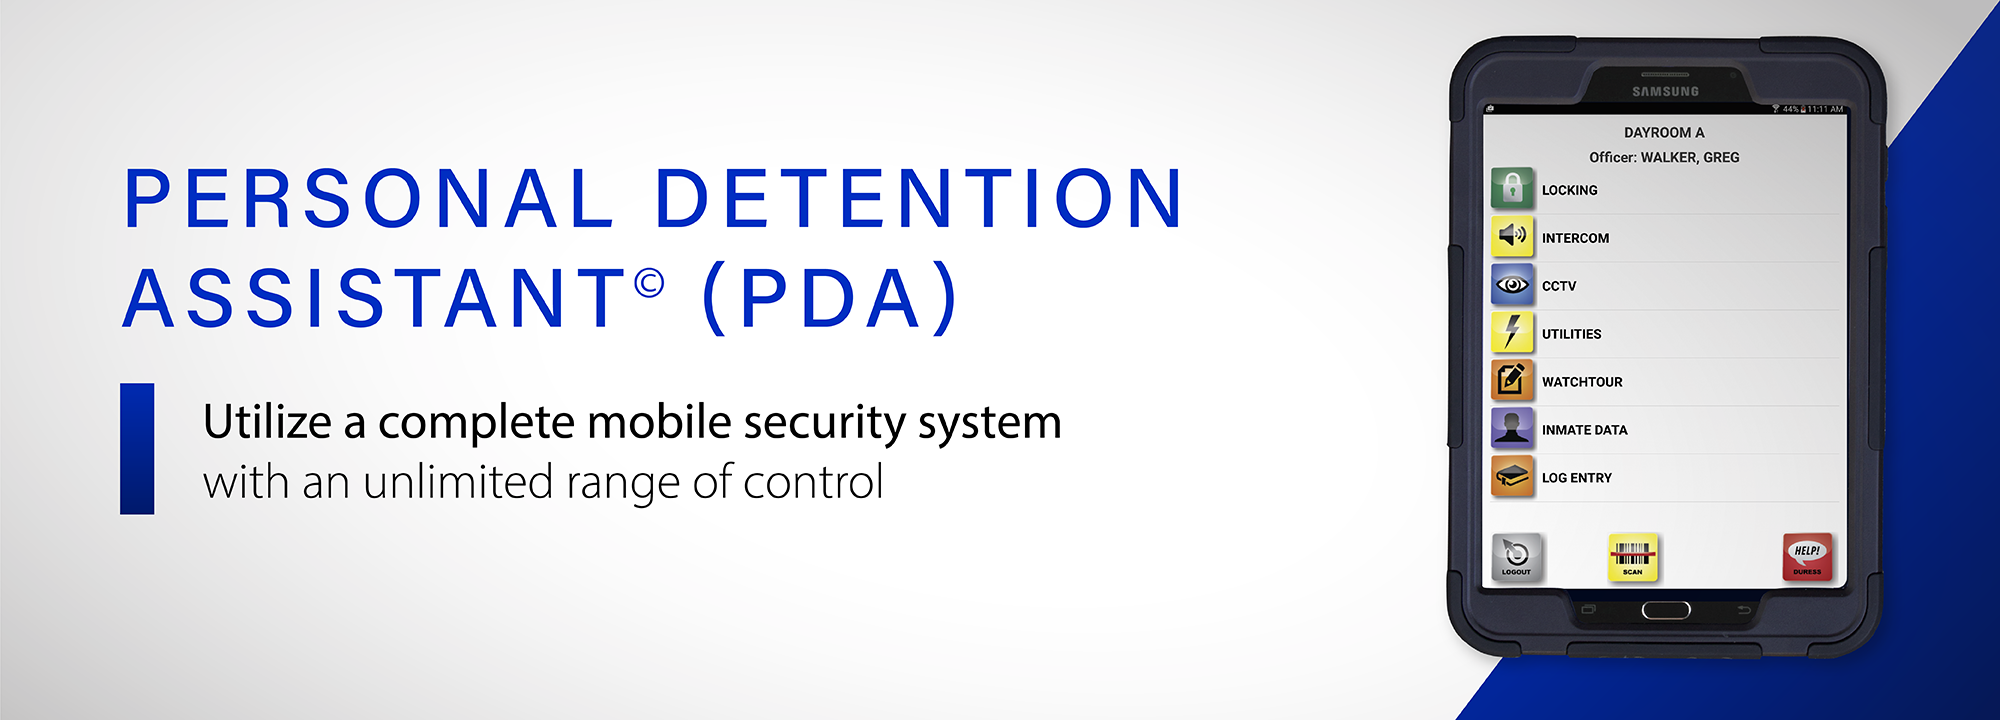 Personal Detention Assistants (PDA)